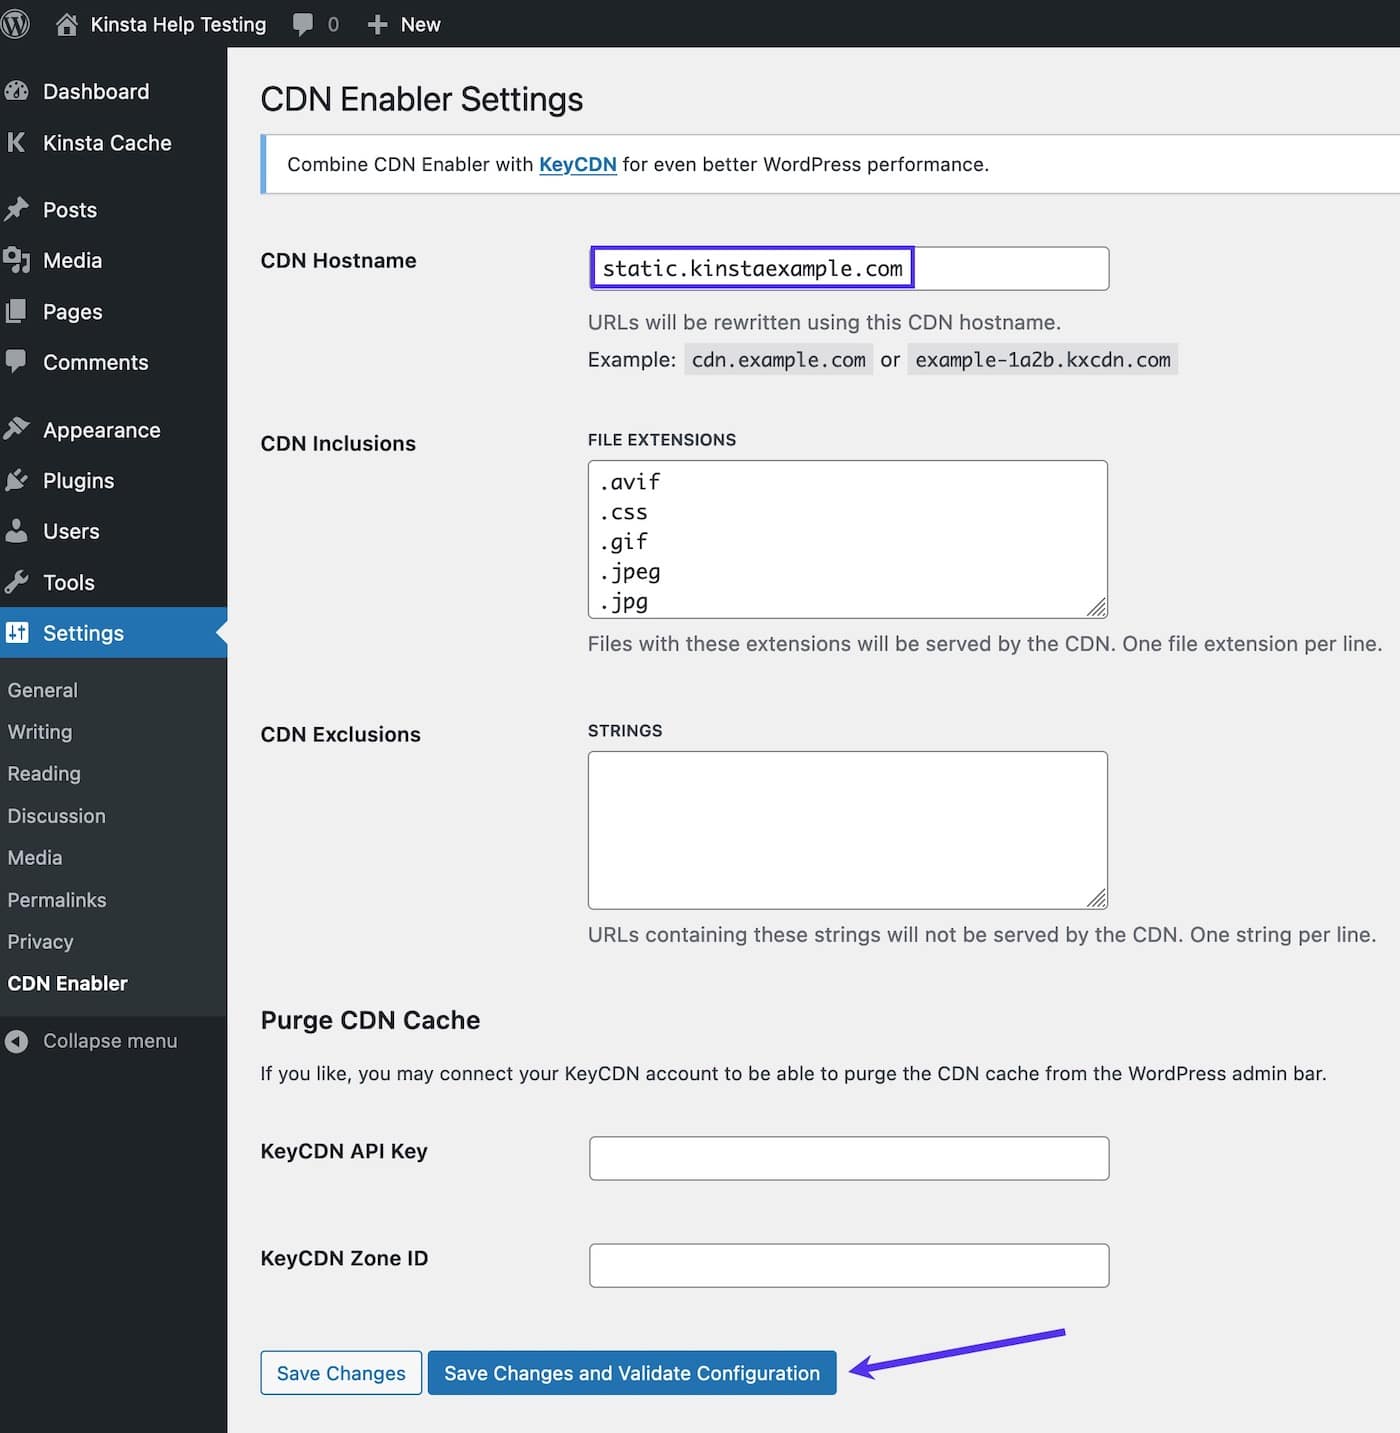 Enter your static assets subdomain, then save and validate configuration in CDN Enabler.